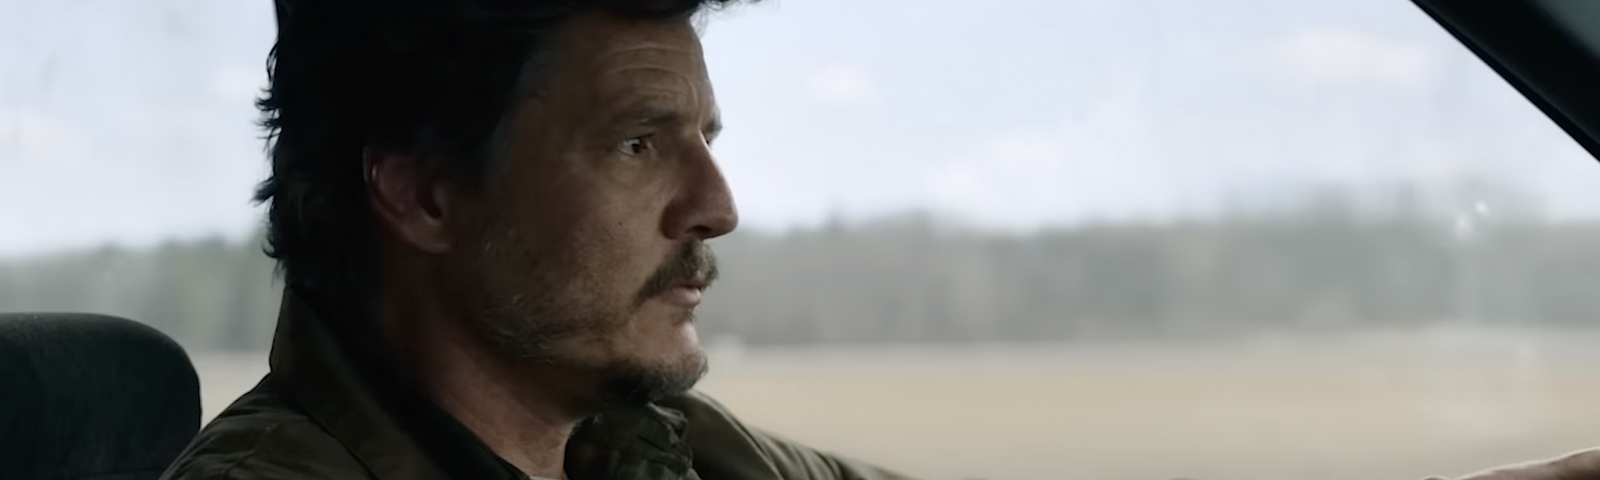 Pedro Pascal, playing Joel in HBO’s The Last of Us, is driving a car.